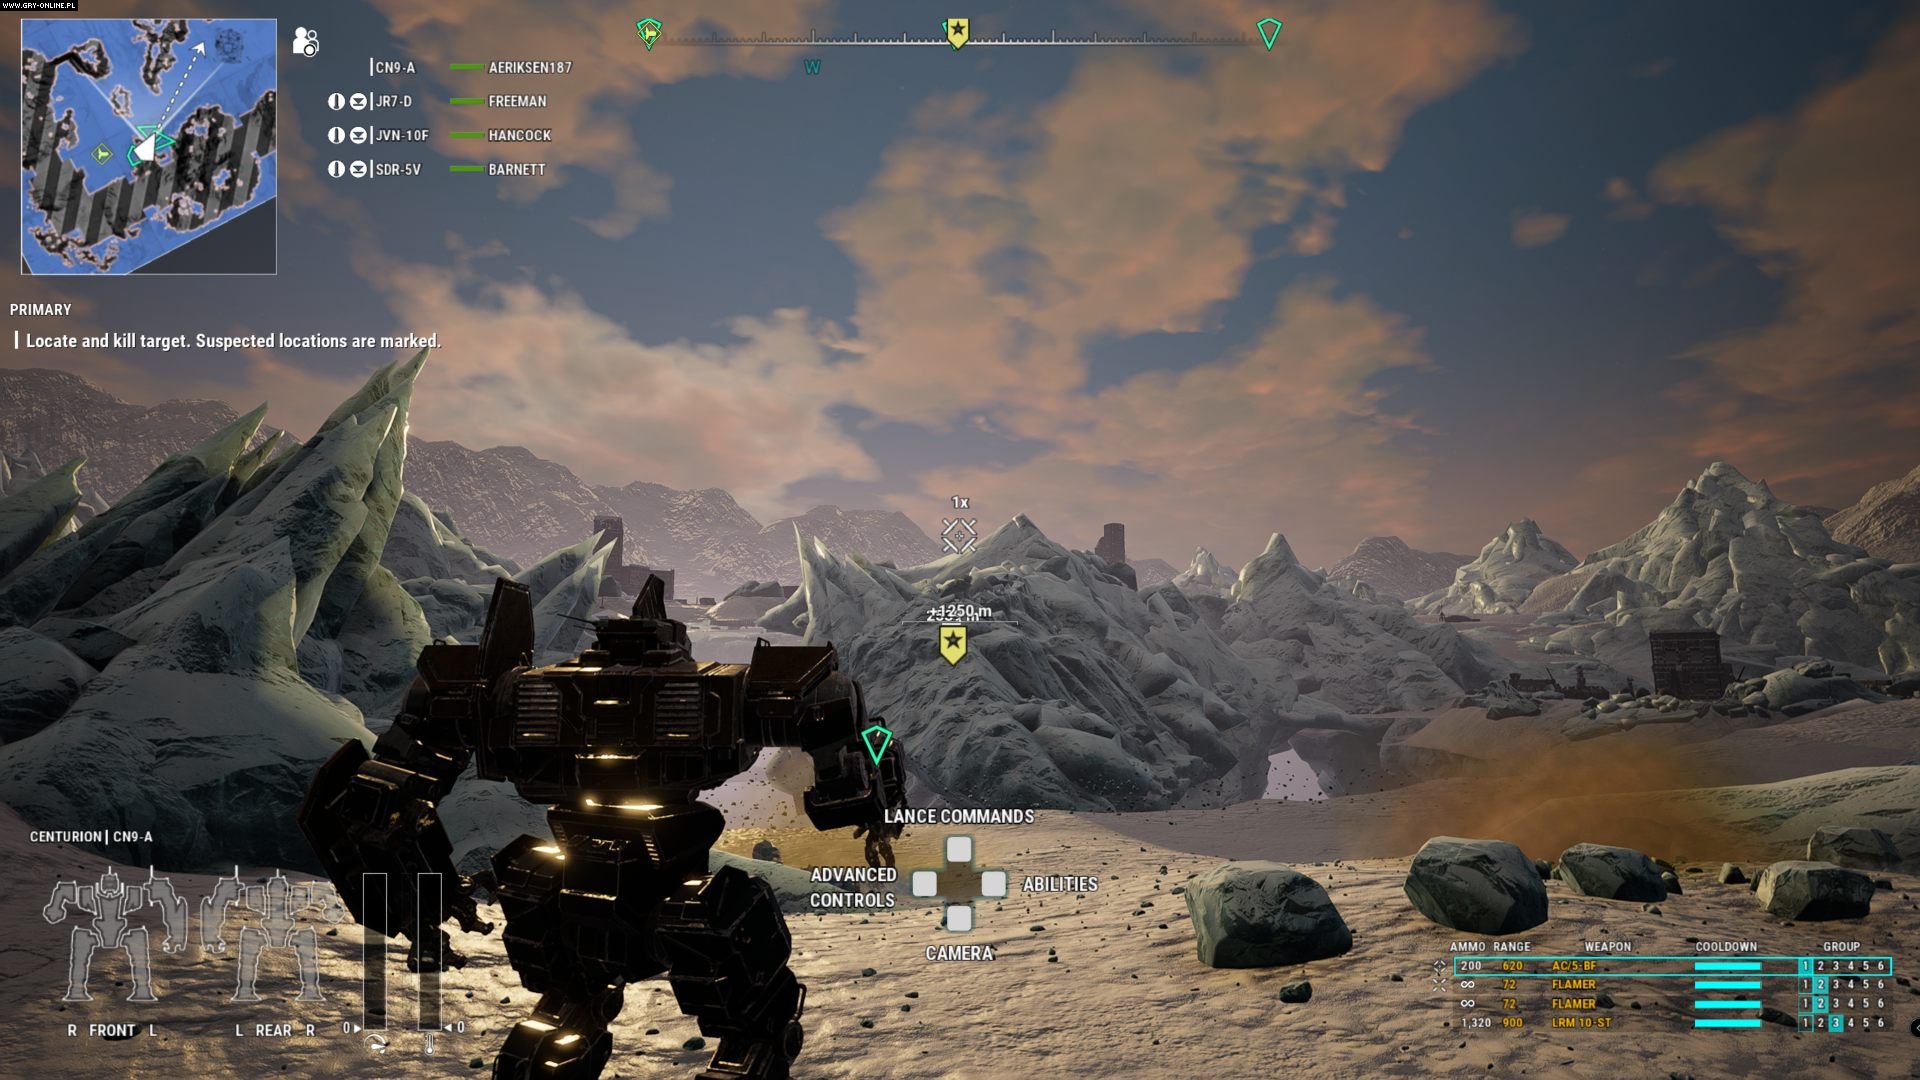 Mechwarrior 5 Can Be a Thrill - If Youve Never Played Games - картинка №3